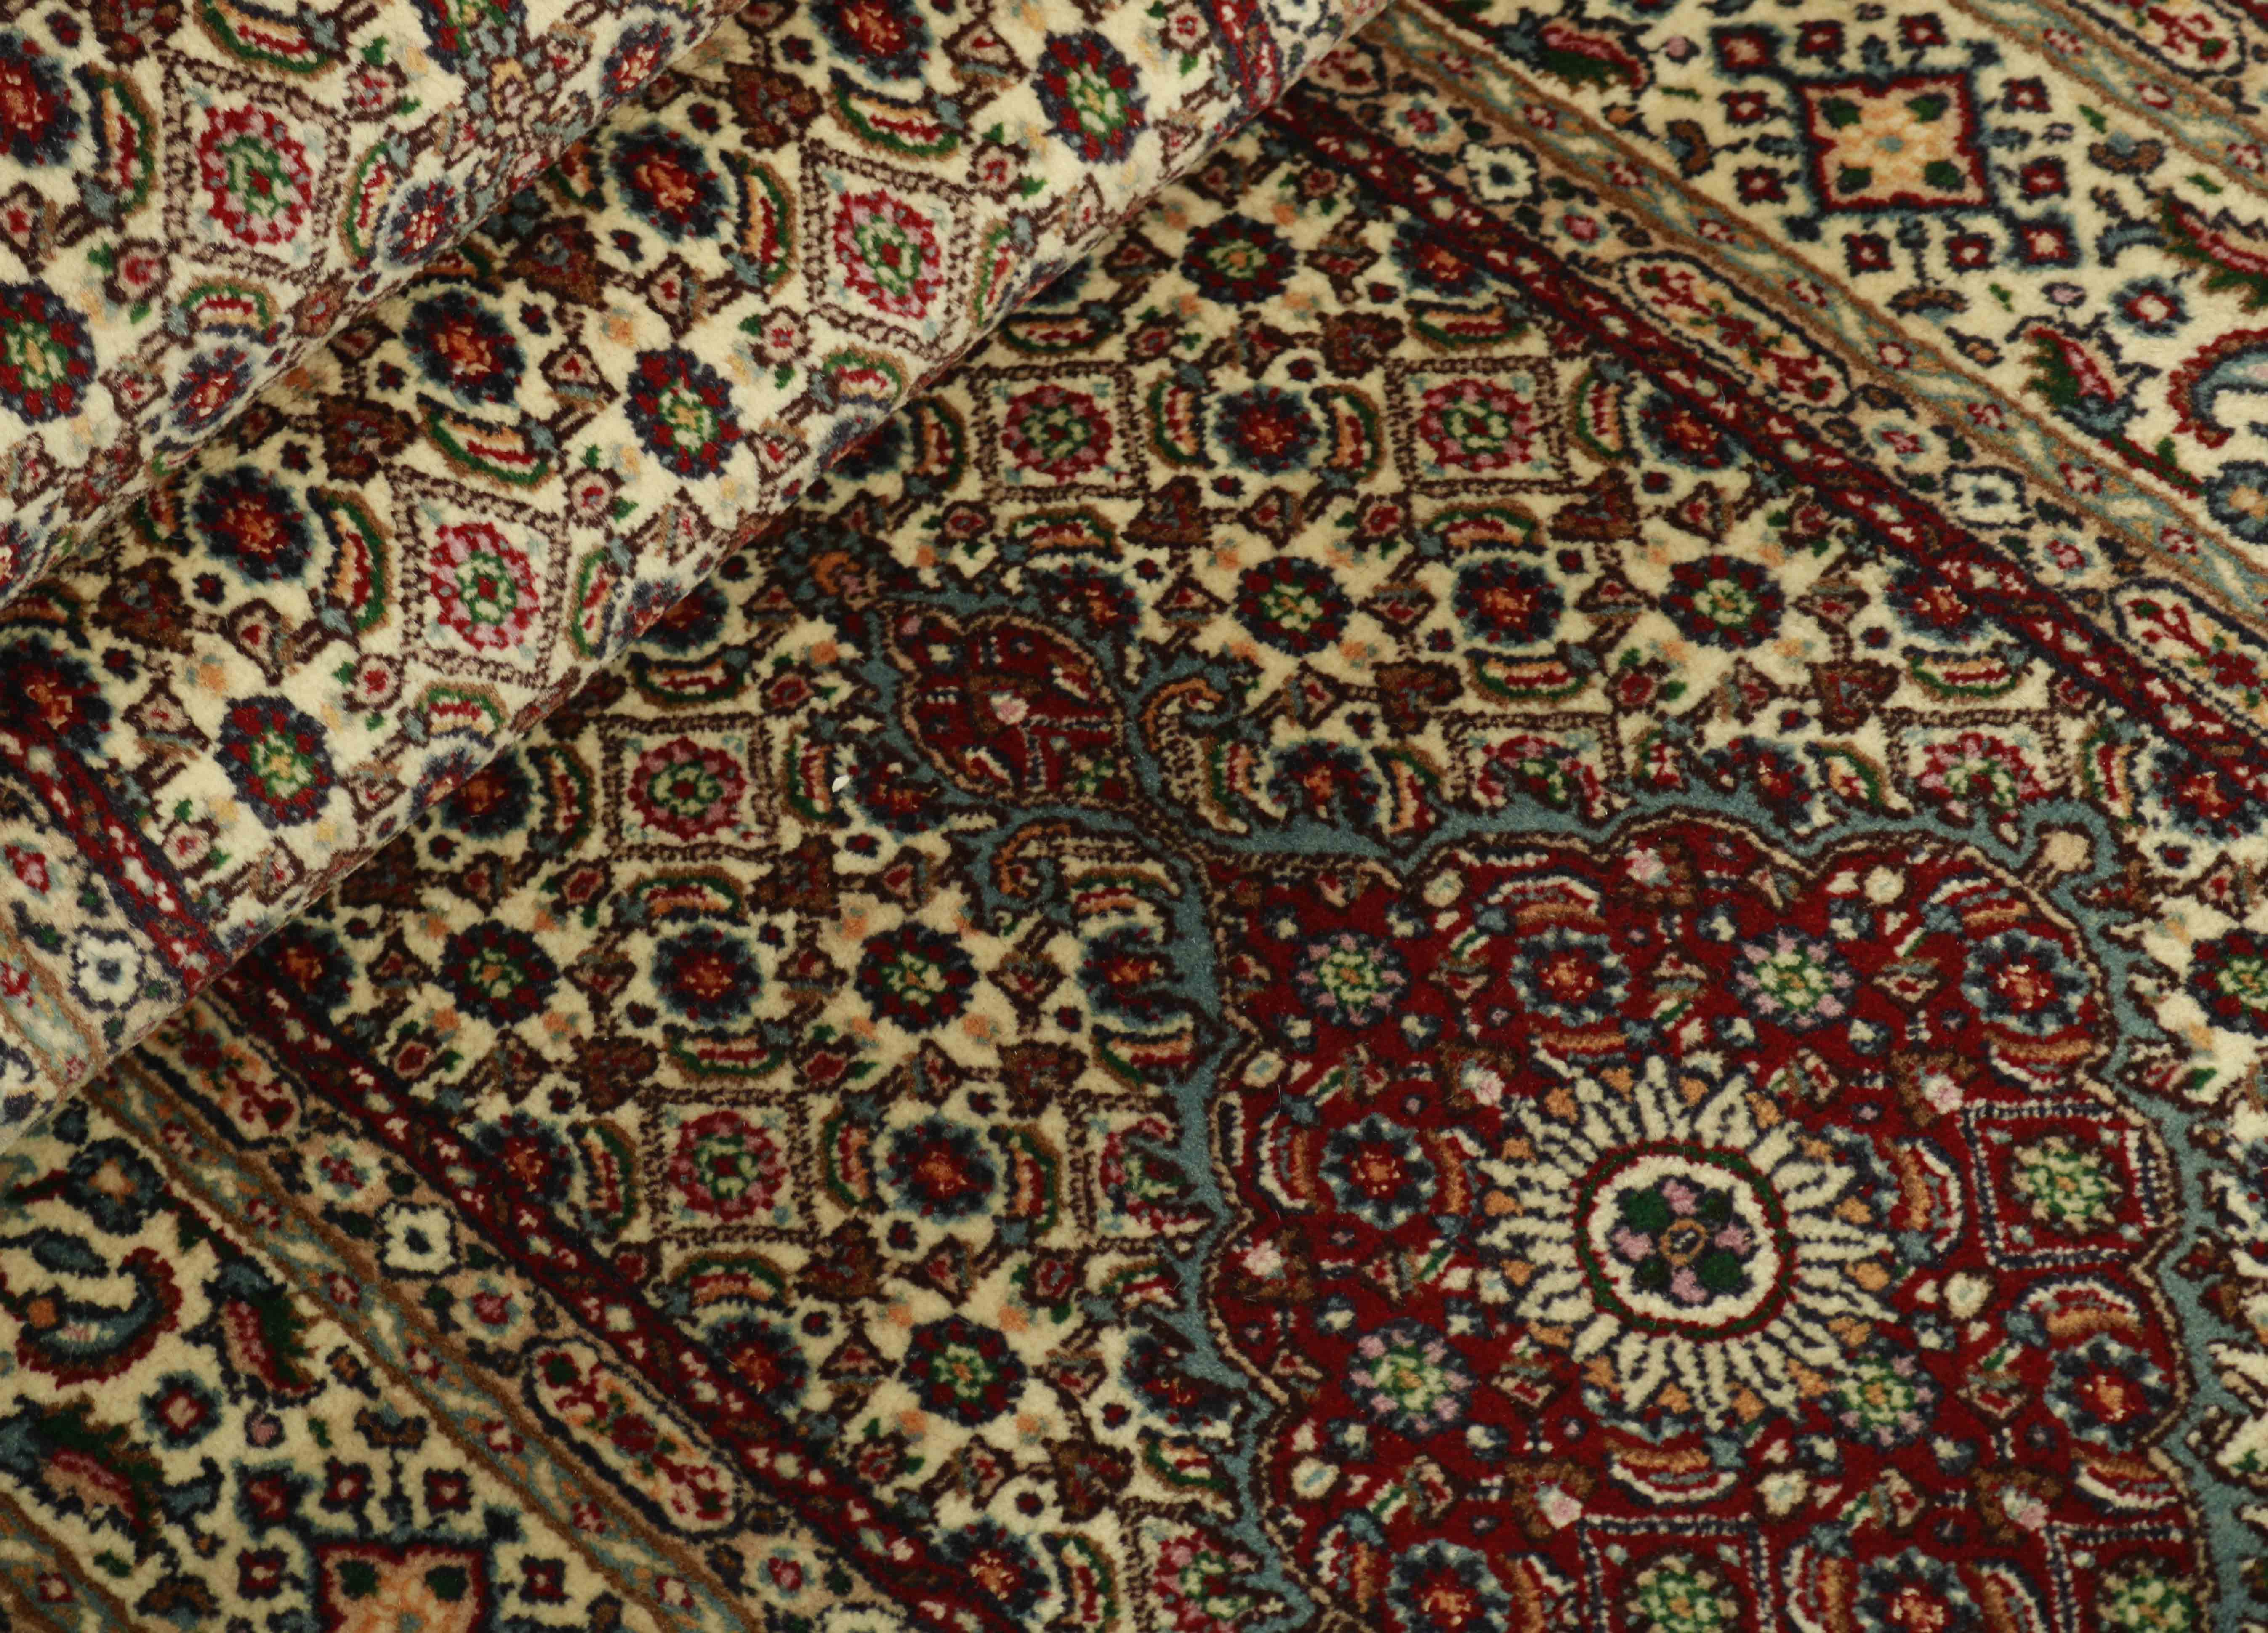 authentic persian runner with traditional floral pattern in red